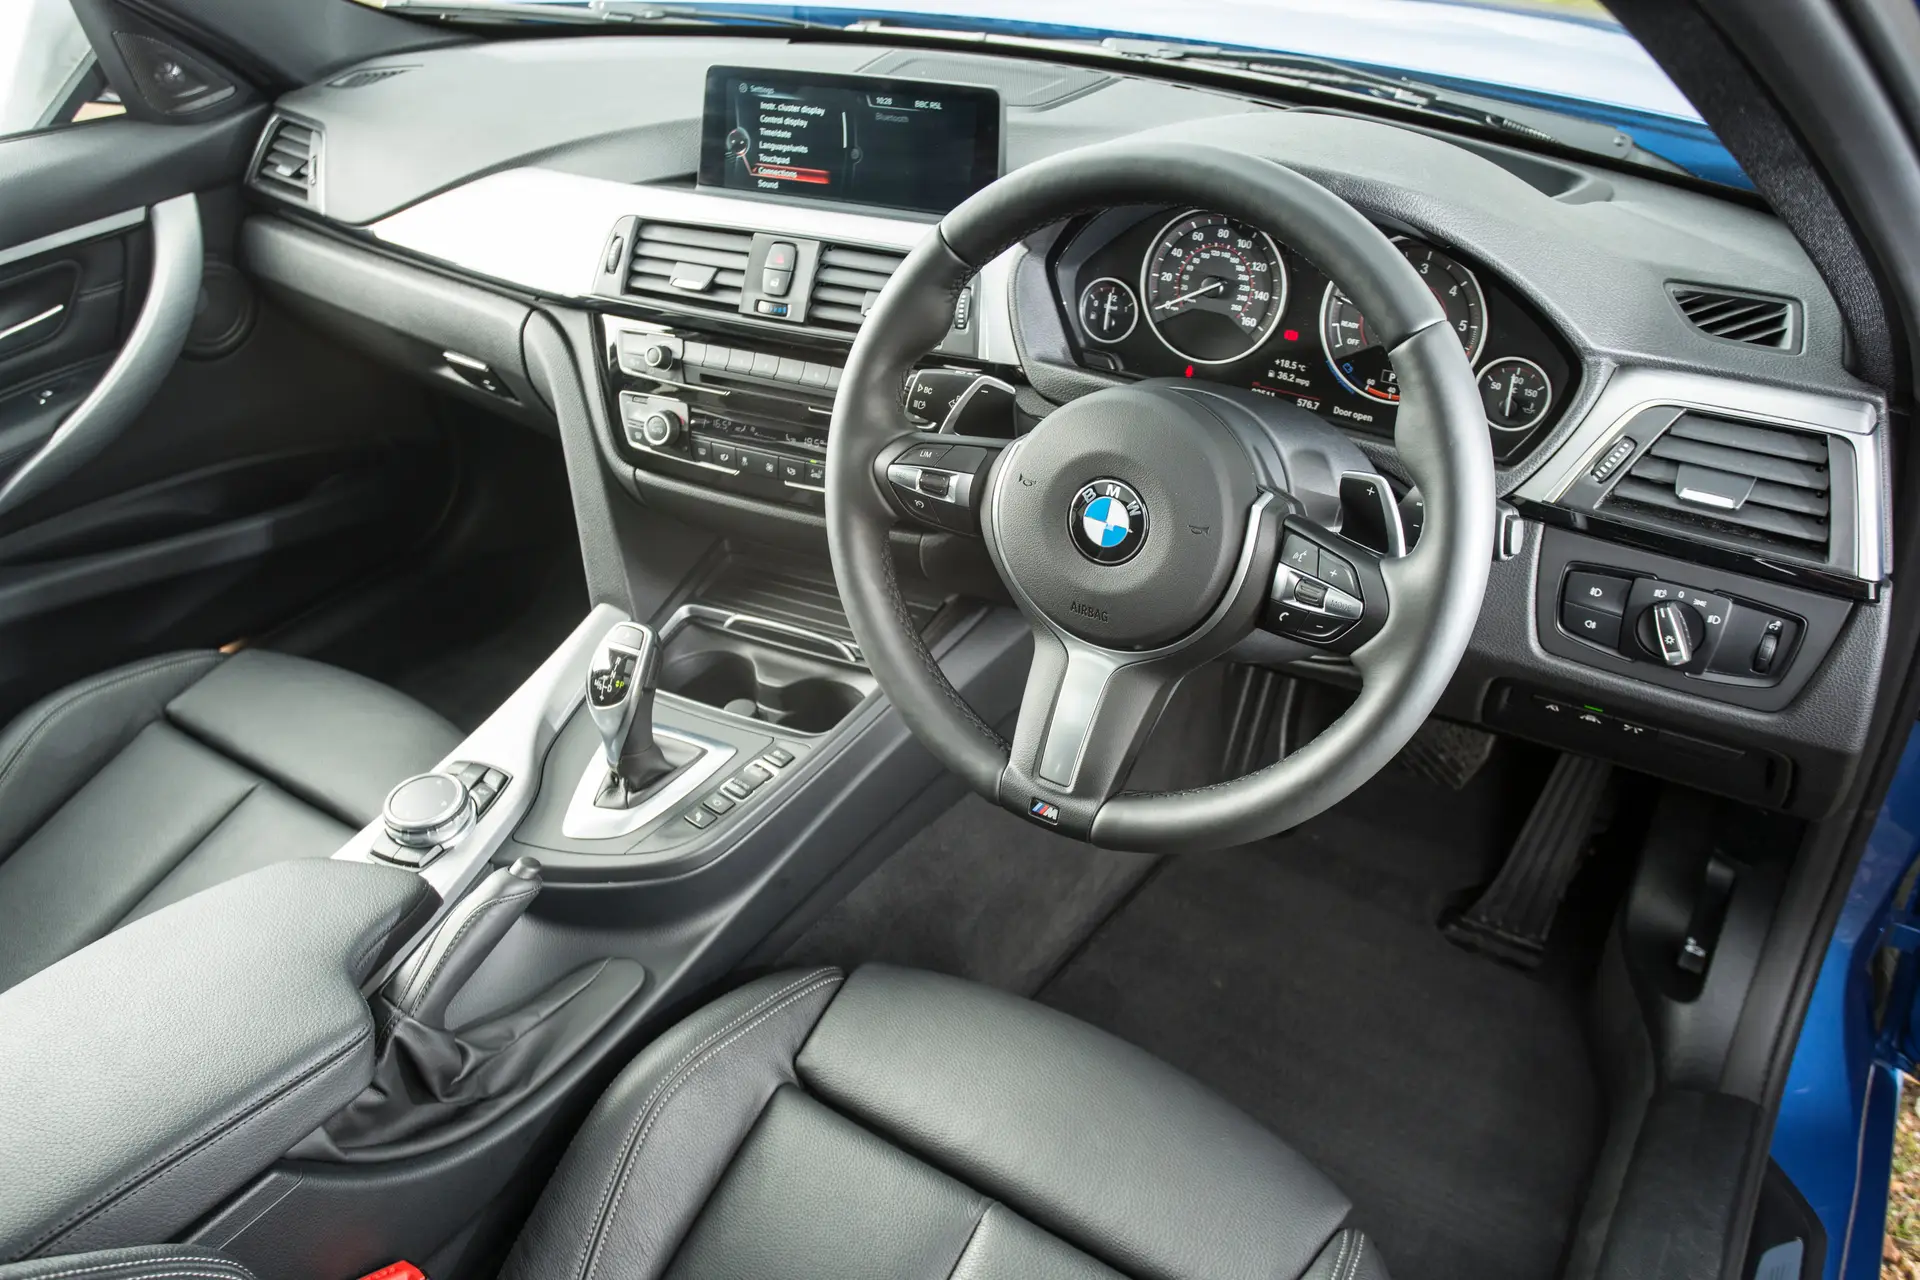 BMW 3 Series Touring (2012-2019) Review: interior close up photo of the BMW 3 Series Touring dashboard